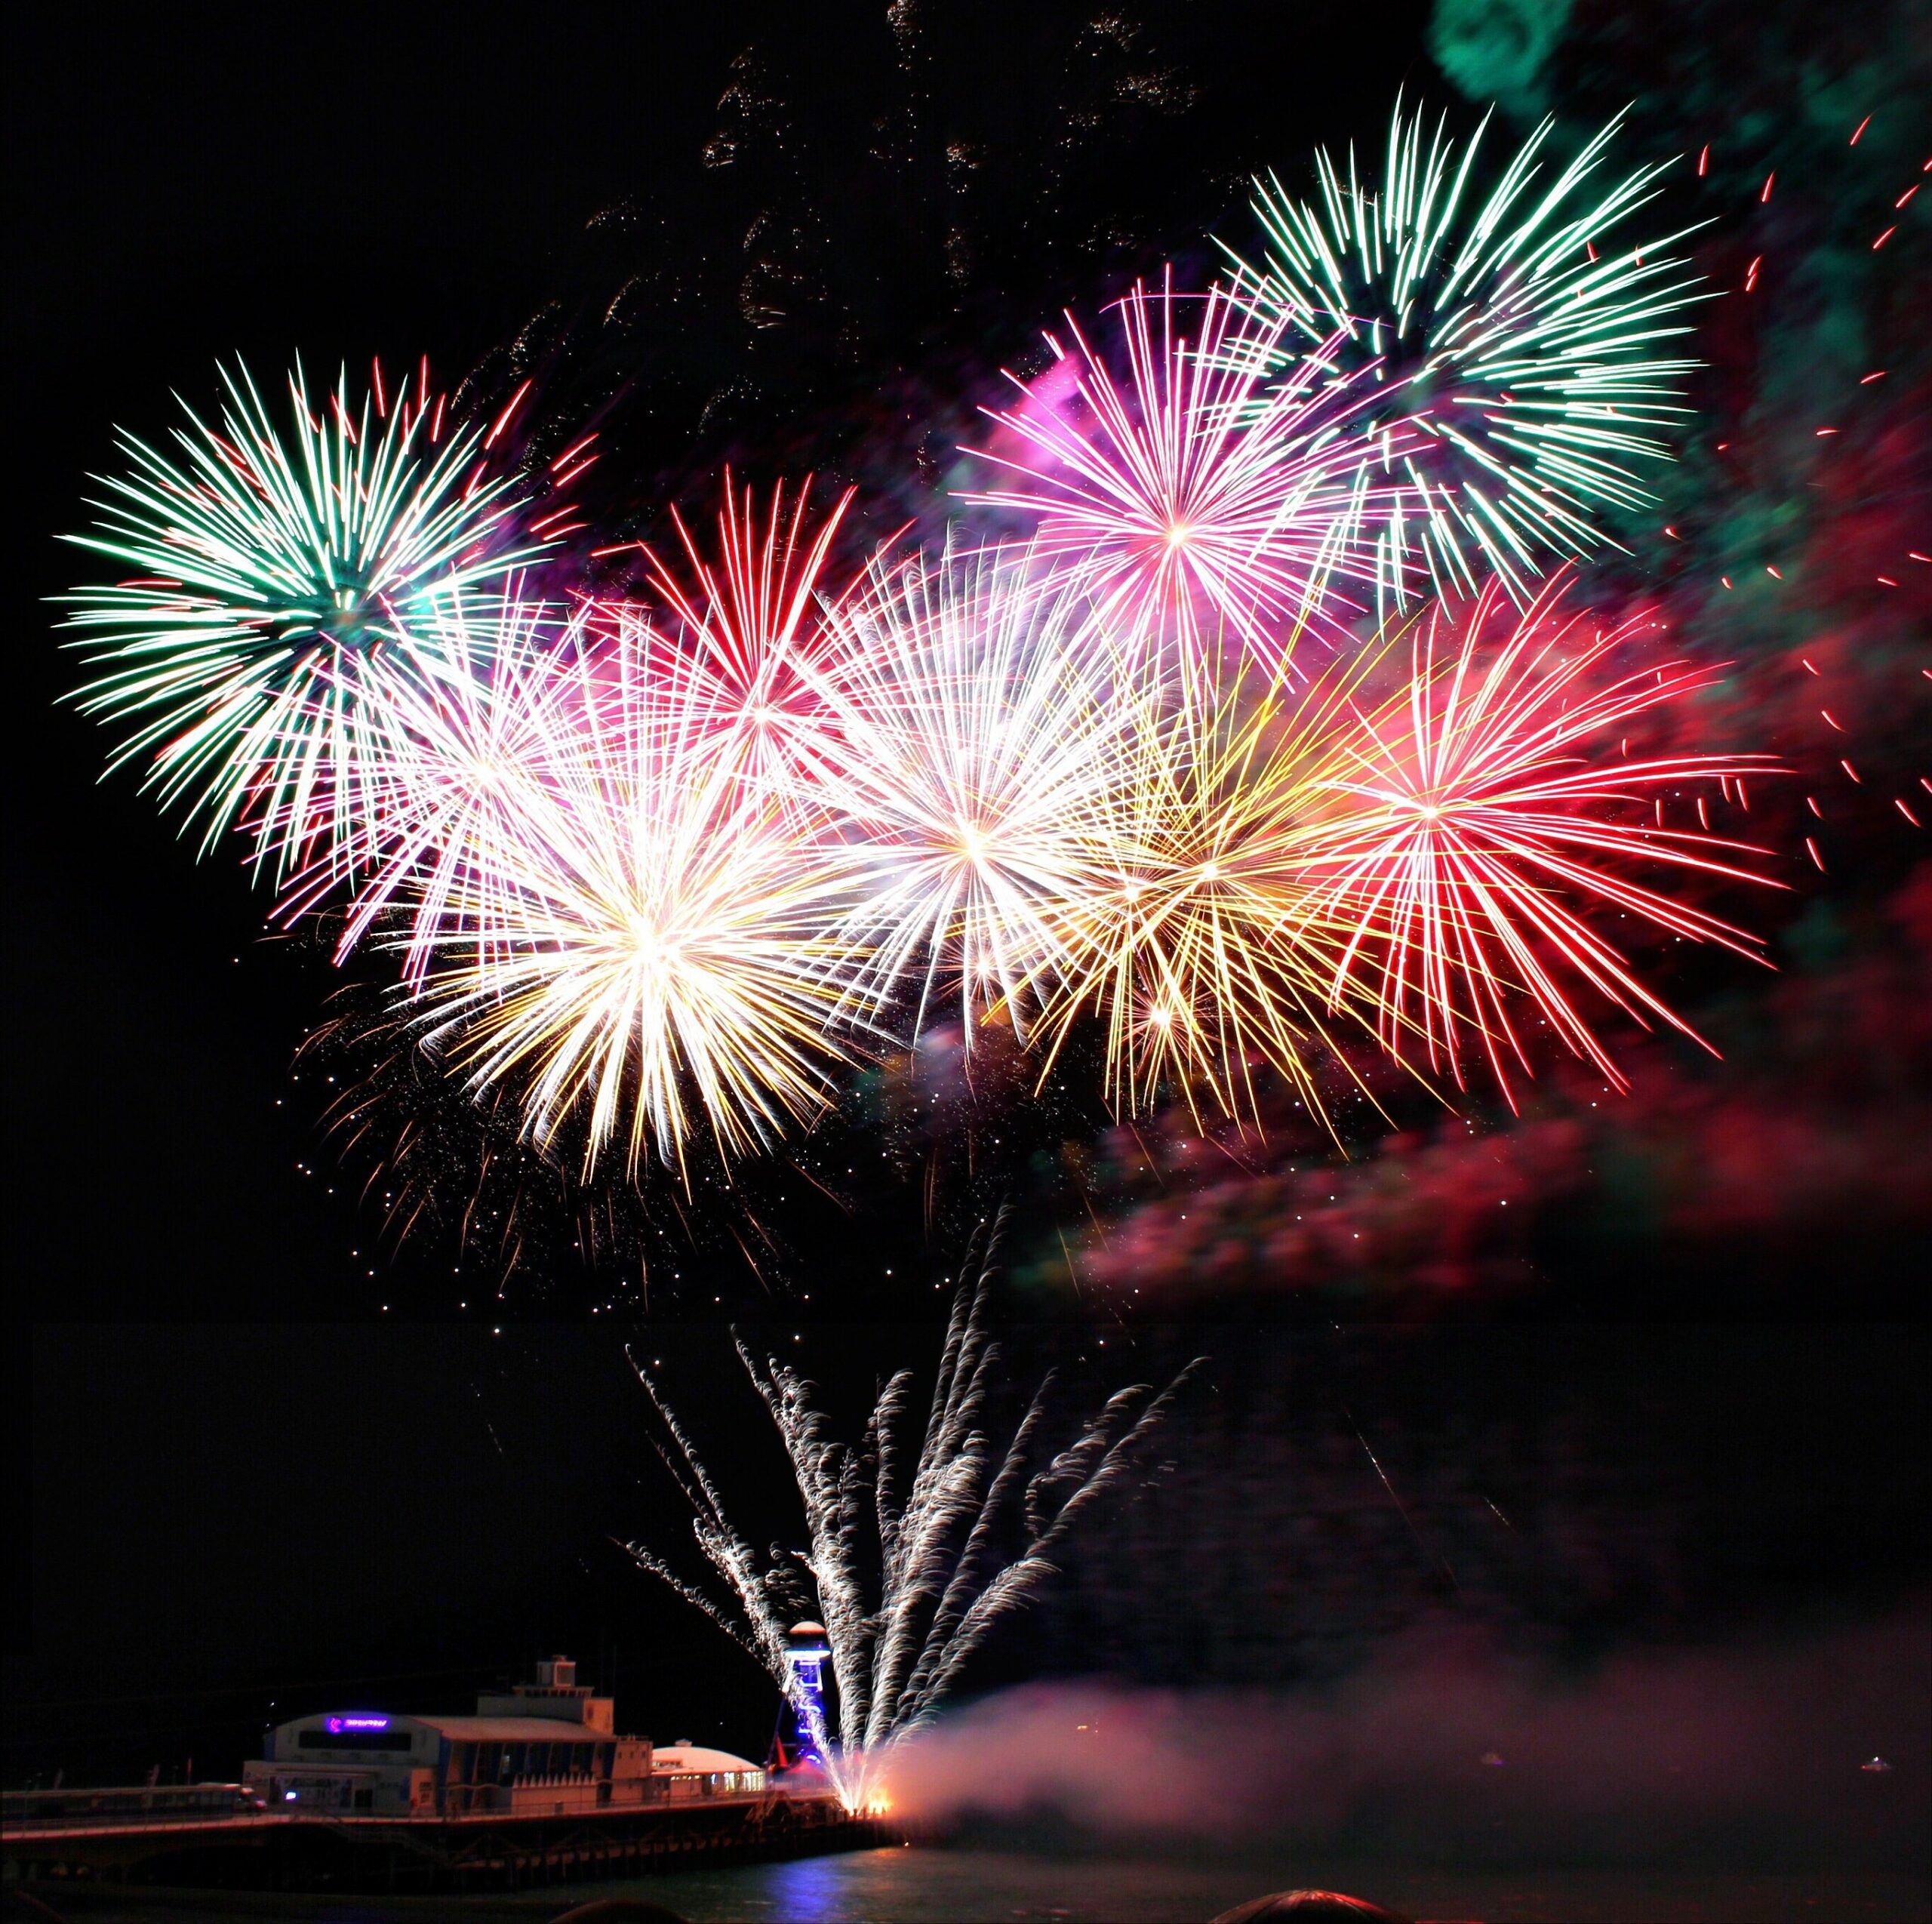 Photo by Anna-Louise: https://www.pexels.com/photo/photo-of-fireworks-1387577/